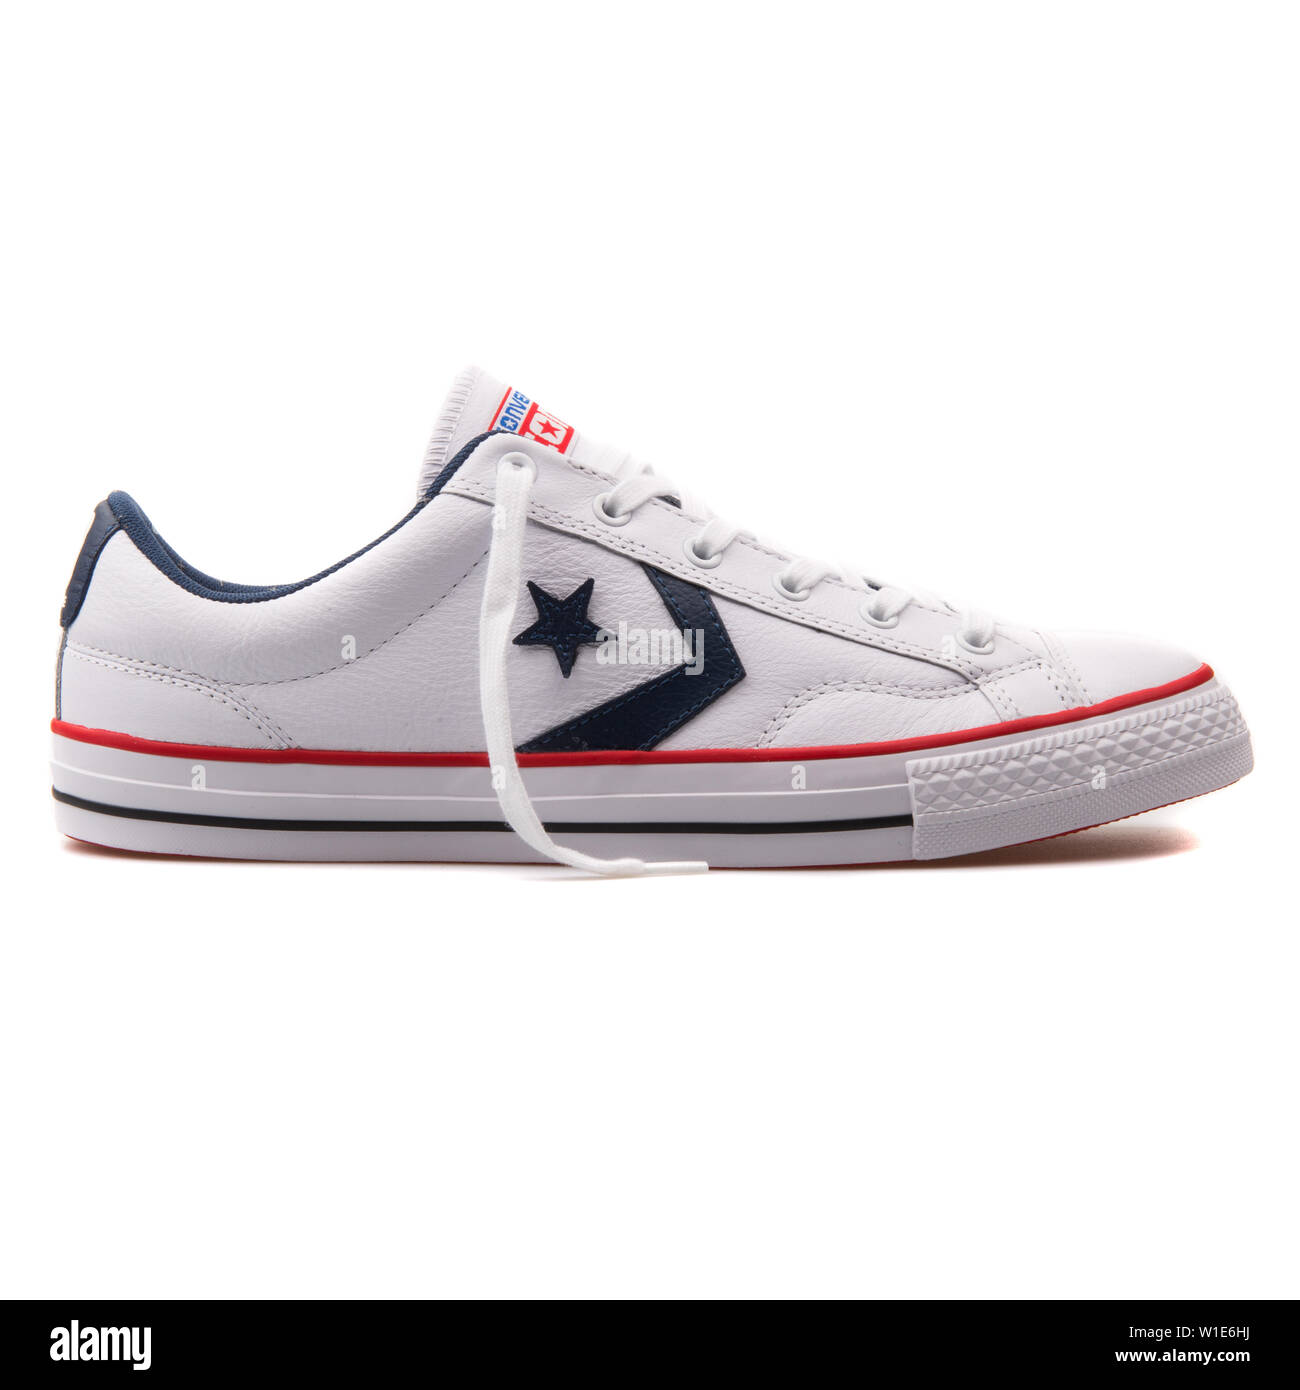 VIENNA, AUSTRIA - AUGUST 25, 2017: Converse Star Player OX white and navy  blue sneaker on white background Stock Photo - Alamy